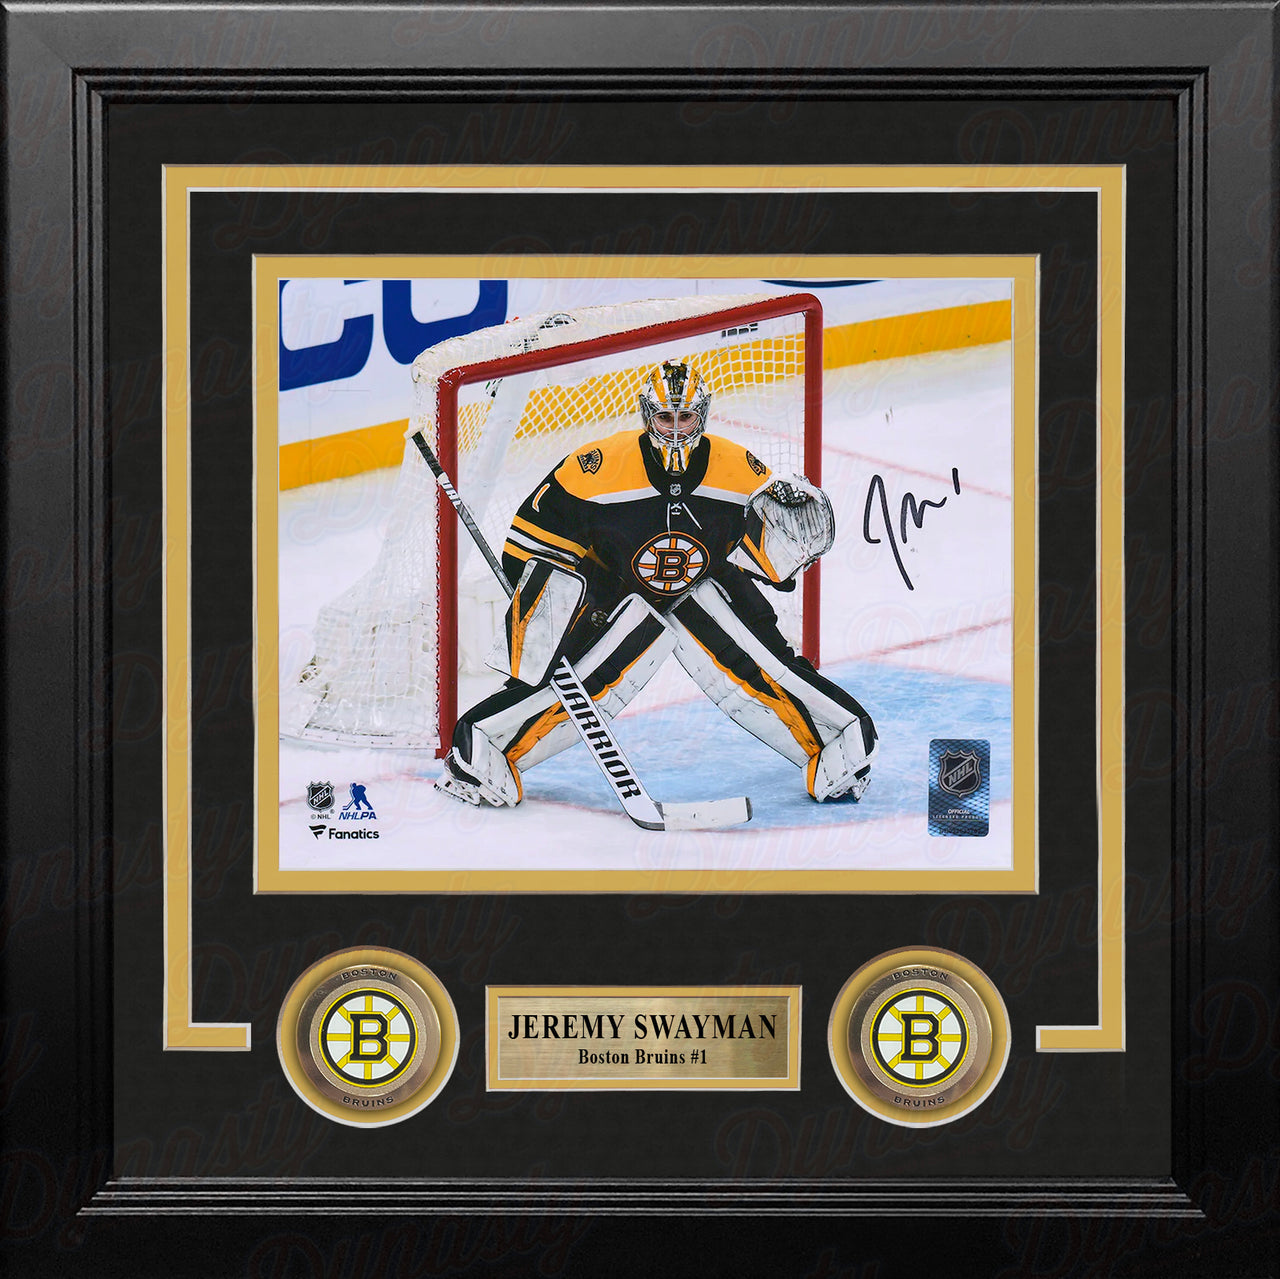 Jeremy Swayman in Action Boston Bruins Autographed 8" x 10" Framed Hockey Photo - Dynasty Sports & Framing 